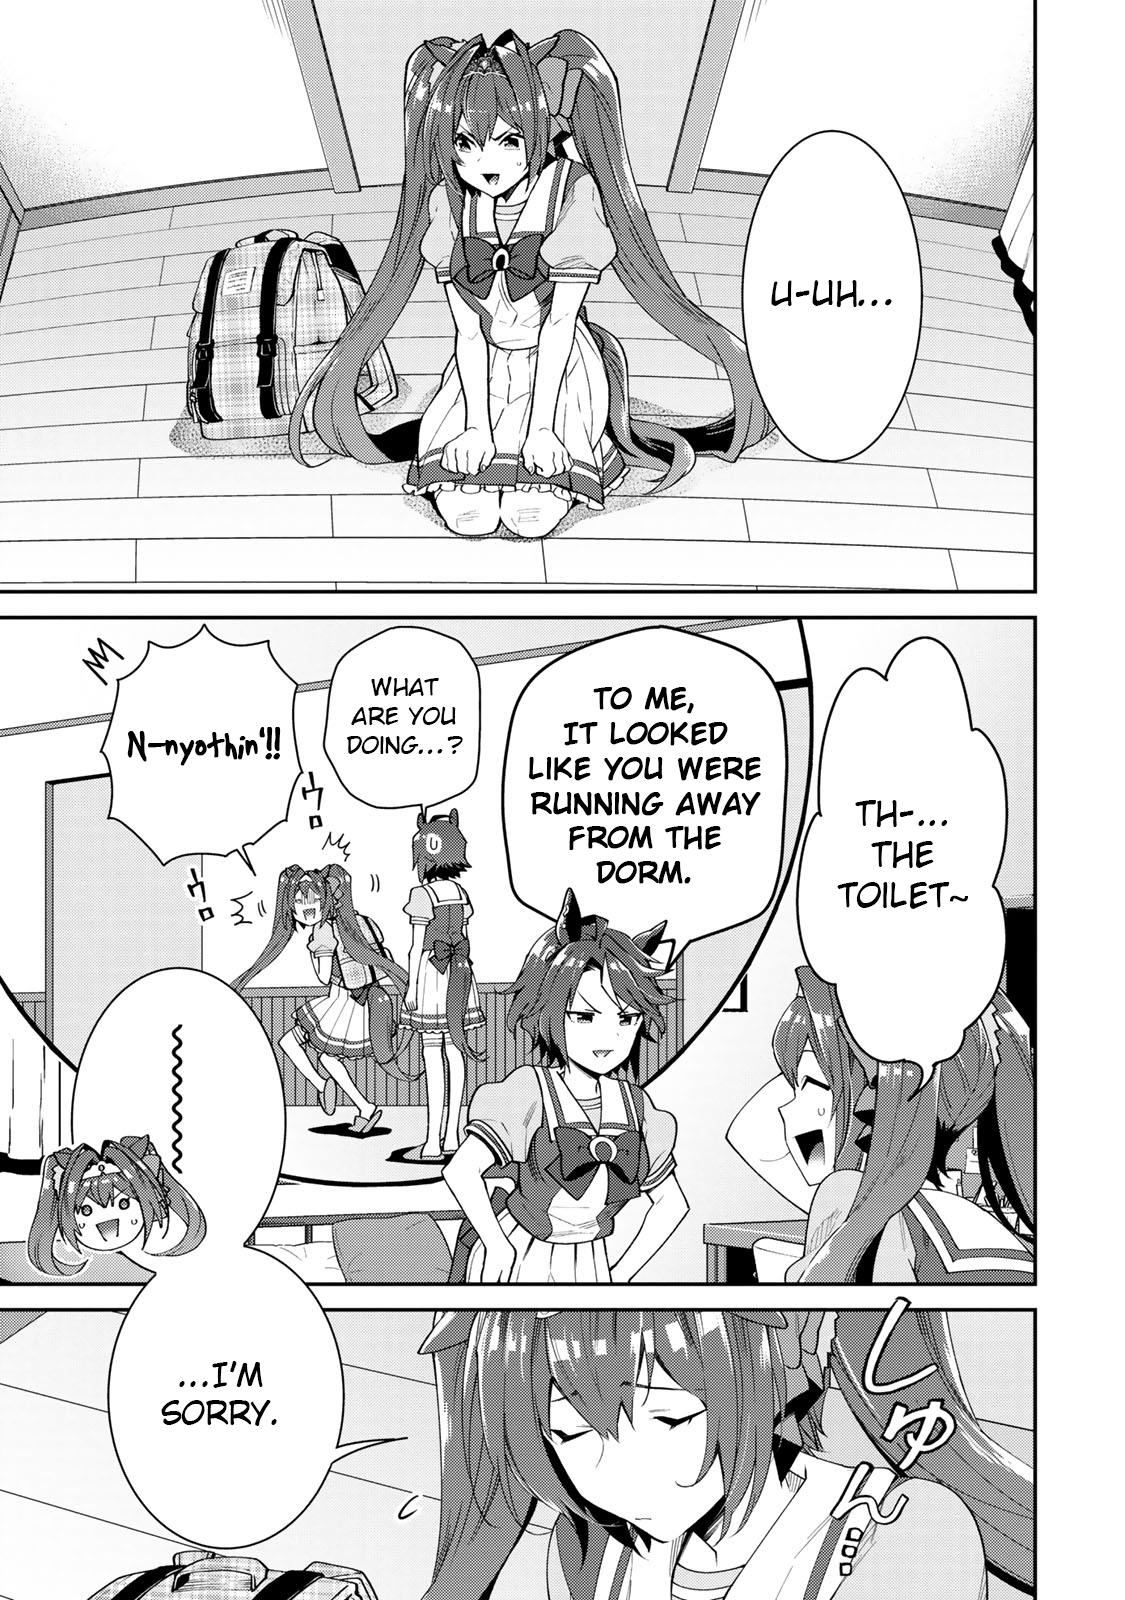 Starting Gate! Uma Musume Pretty Derby Vol.4 Chapter 25: Vodka And Scarlet #3 - Picture 3